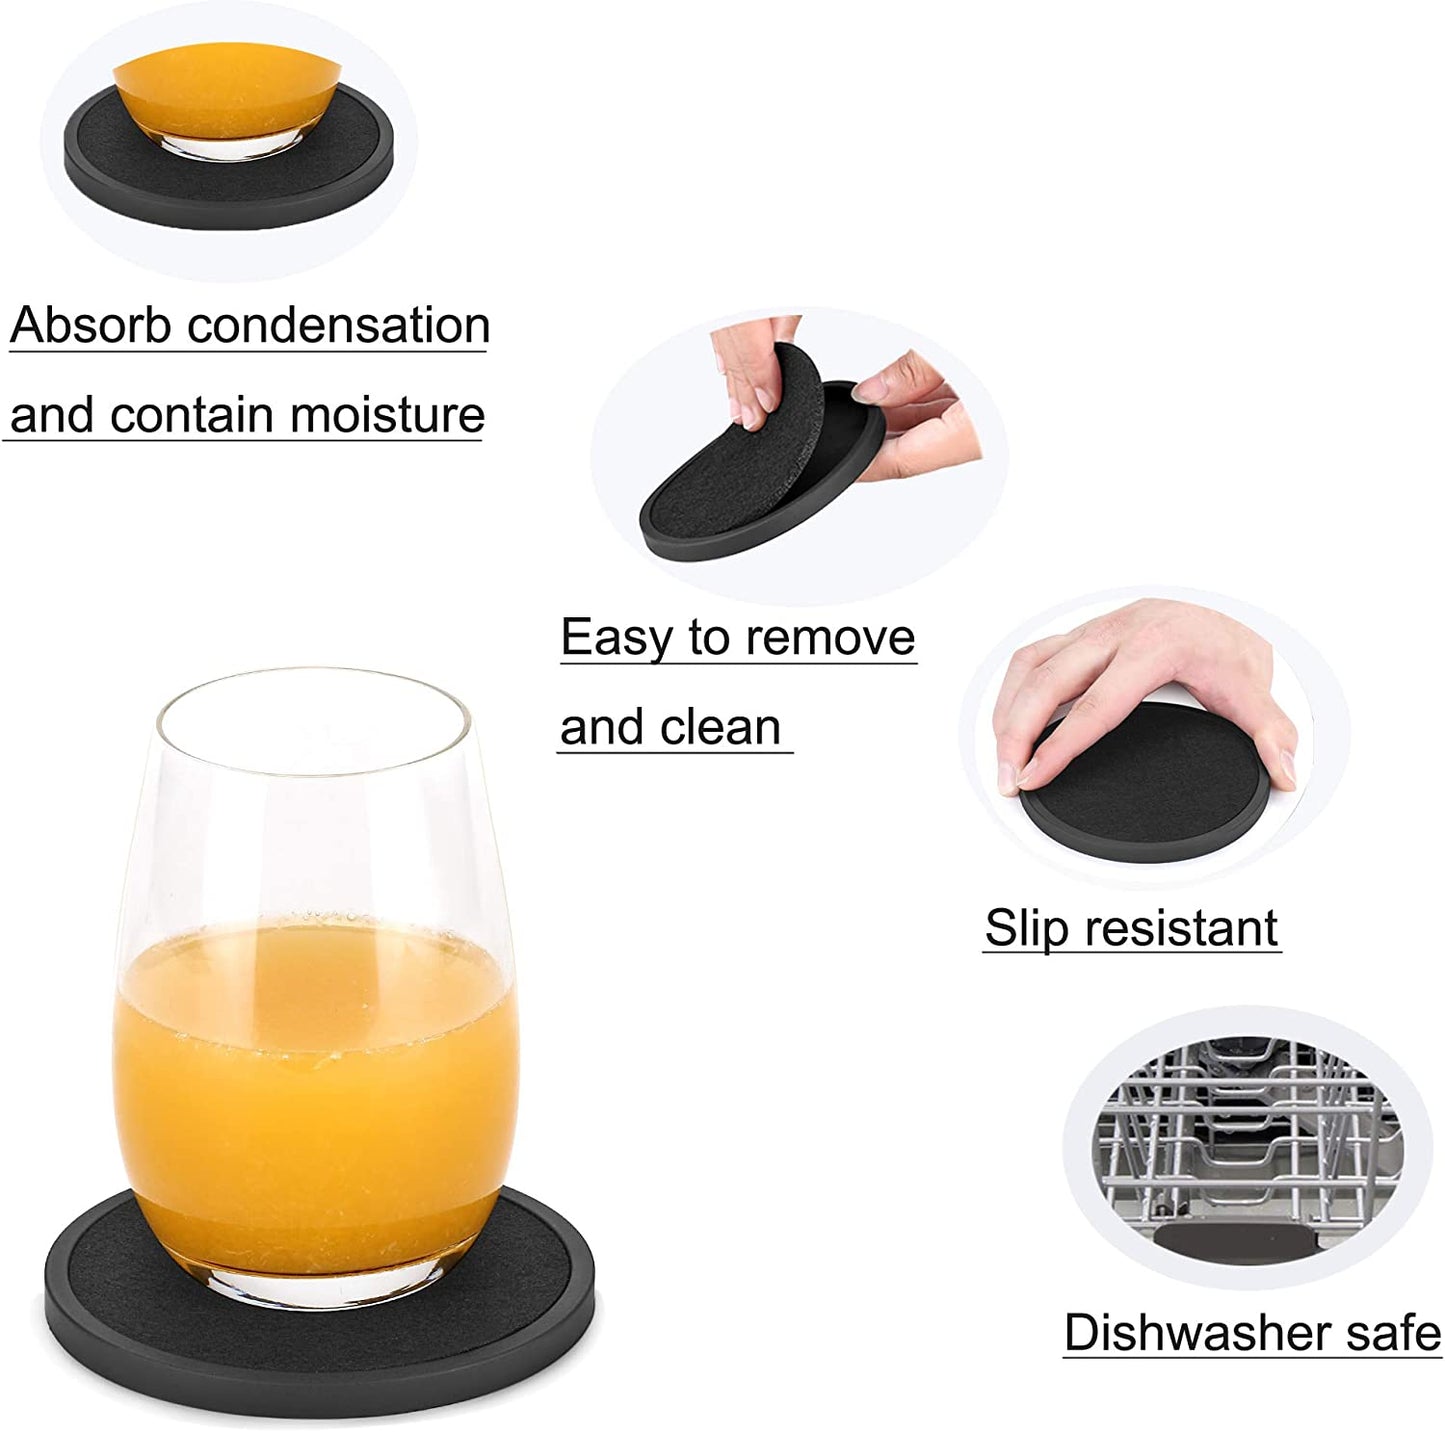 Information about the absorbent coasters. The text reads, "Absorb condensation and contain moisture. Easy to remove and clean. Slip resistant. Dishwasher safe."